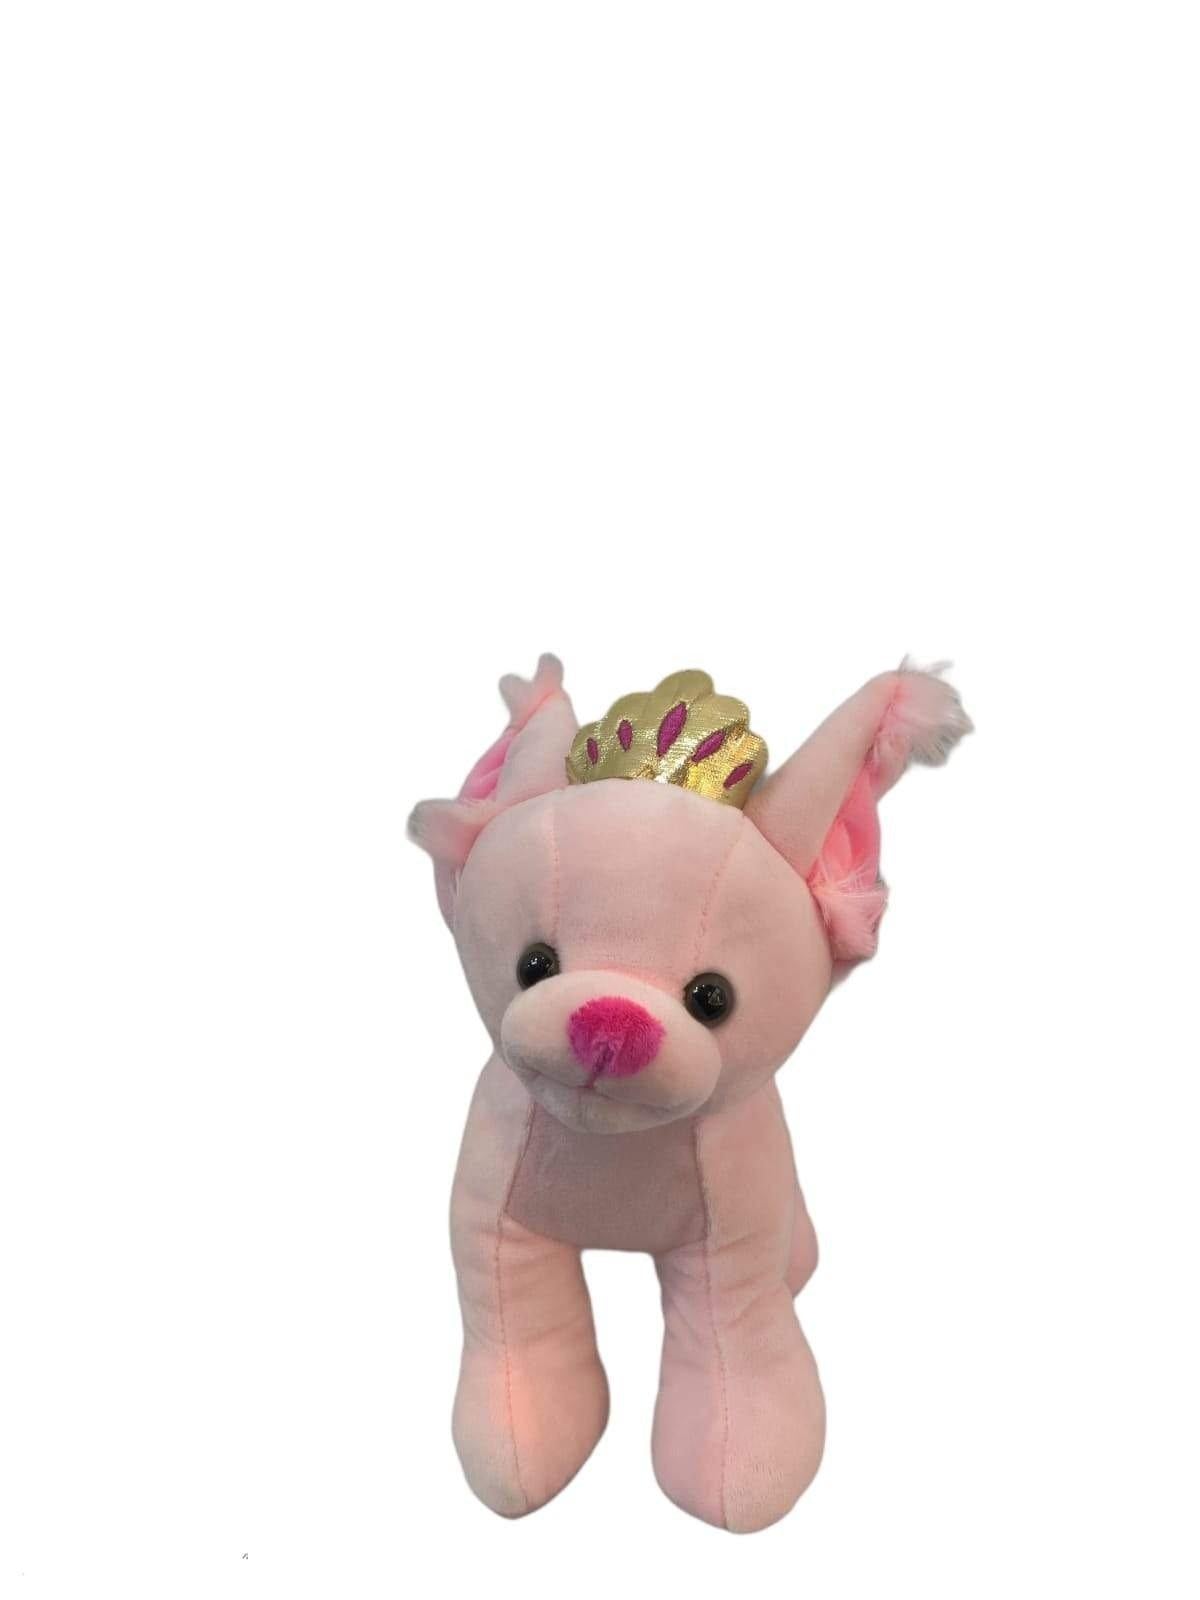 Princess Plush Toy On An Extendable Pink Leash